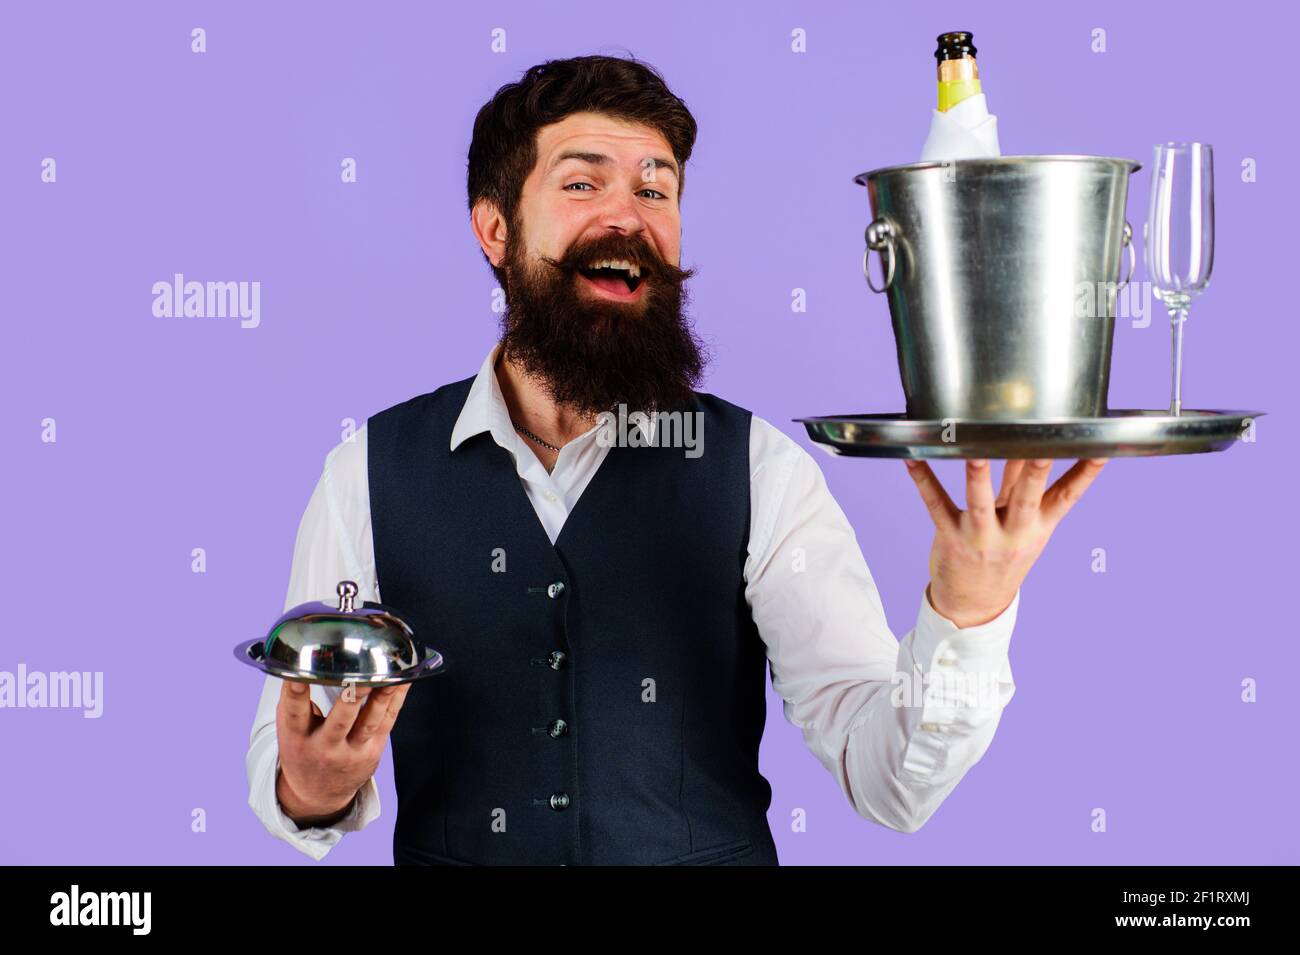 Restaurant serving. Waiter with serving tray with wine cooler and metal cloche. Stock Photo